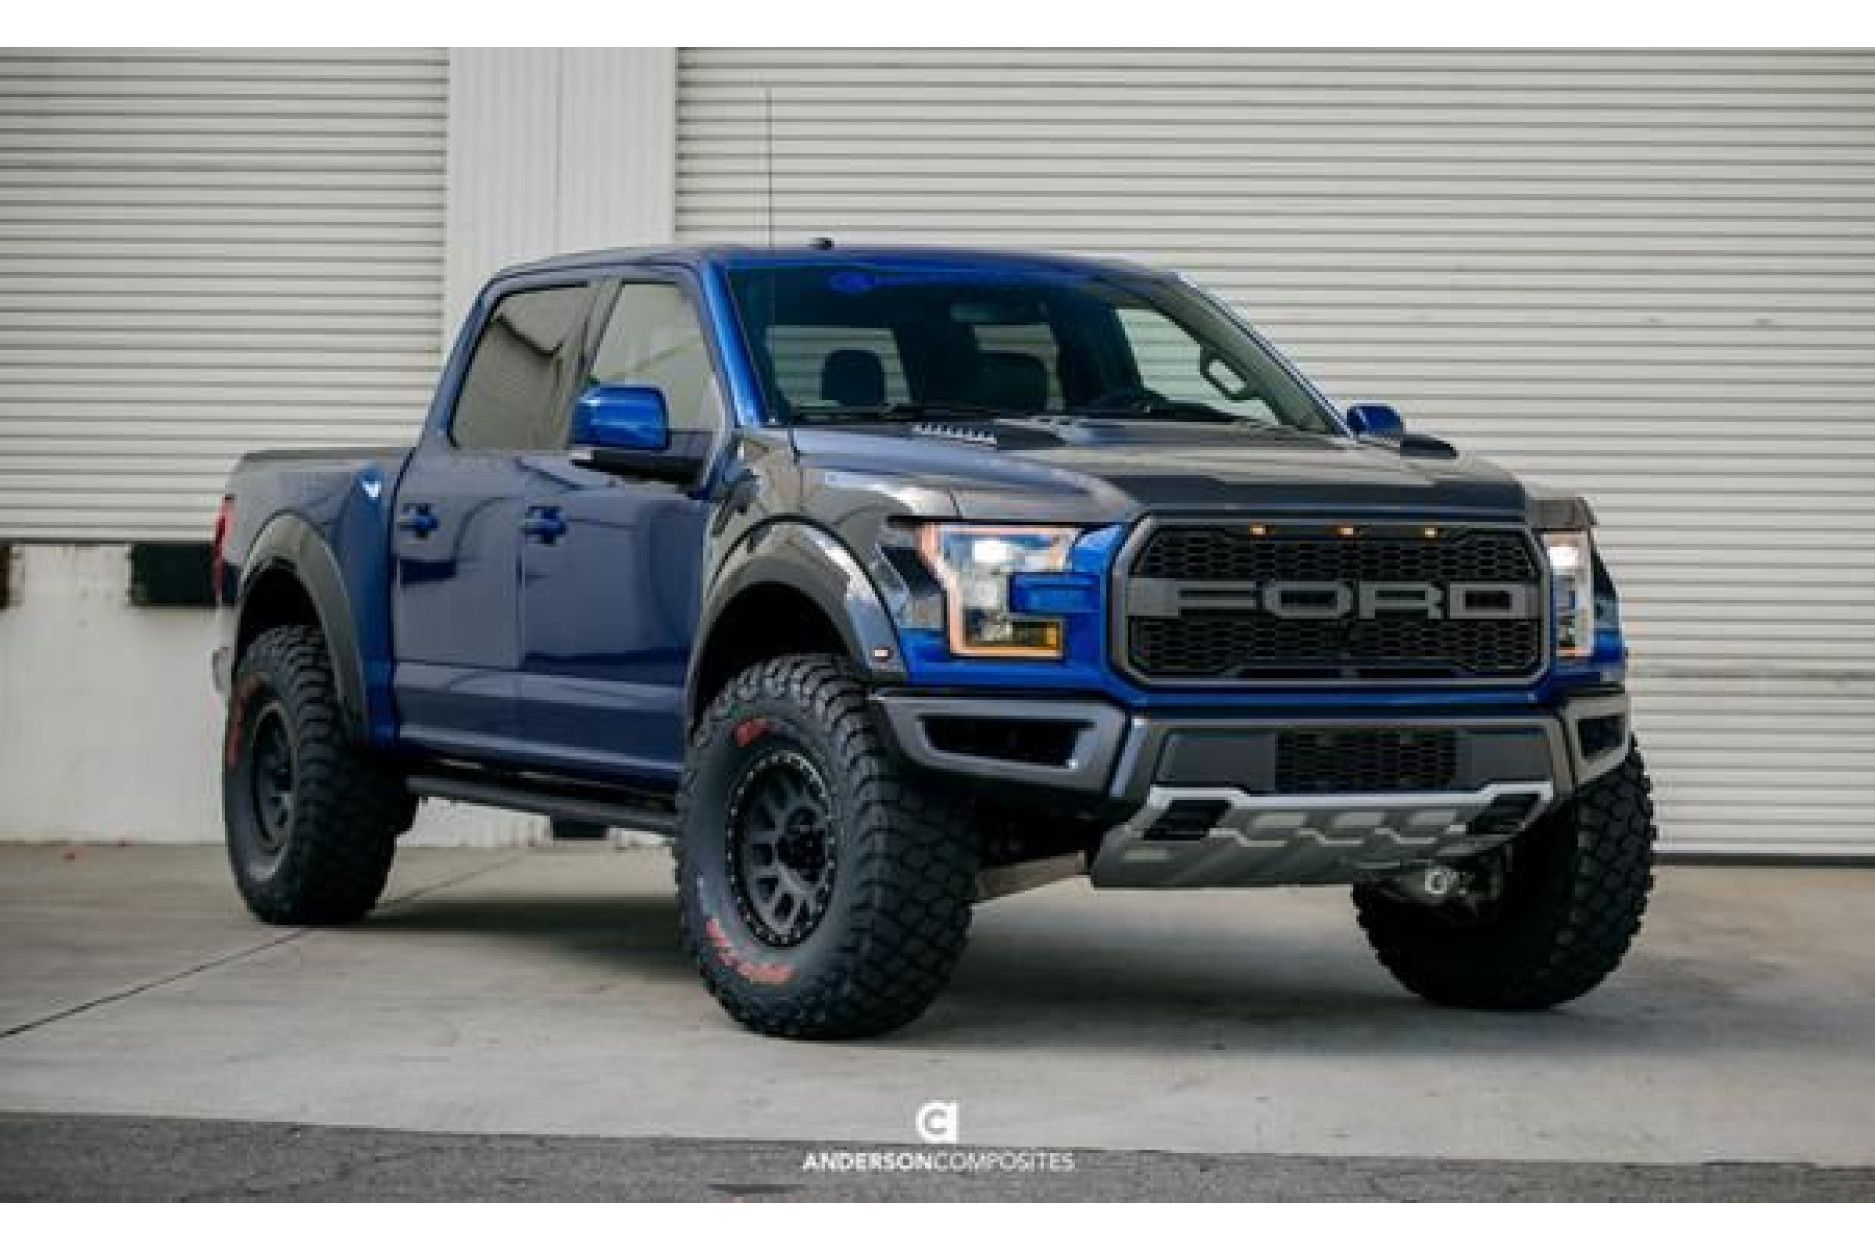 Anderson Composites Carbon Motorhaube für Ford F150 Raptor 2017-2018  TYPE-OE - buy online at CFD